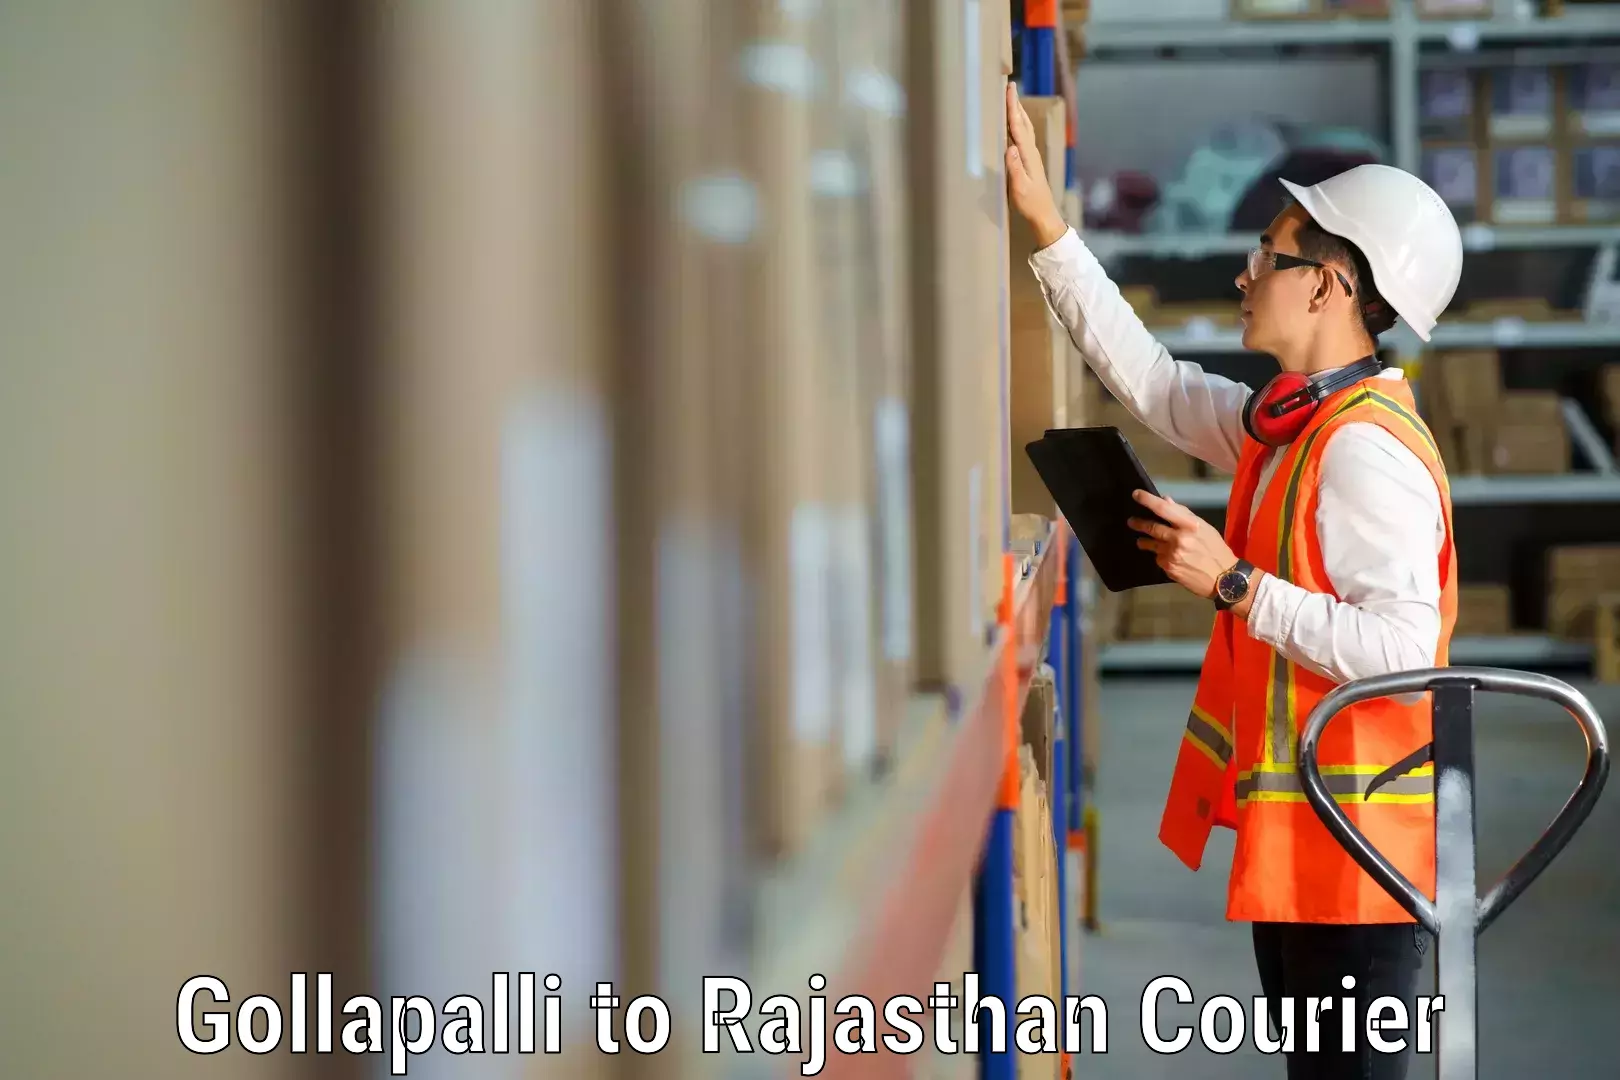 Trusted relocation experts Gollapalli to Jhalawar